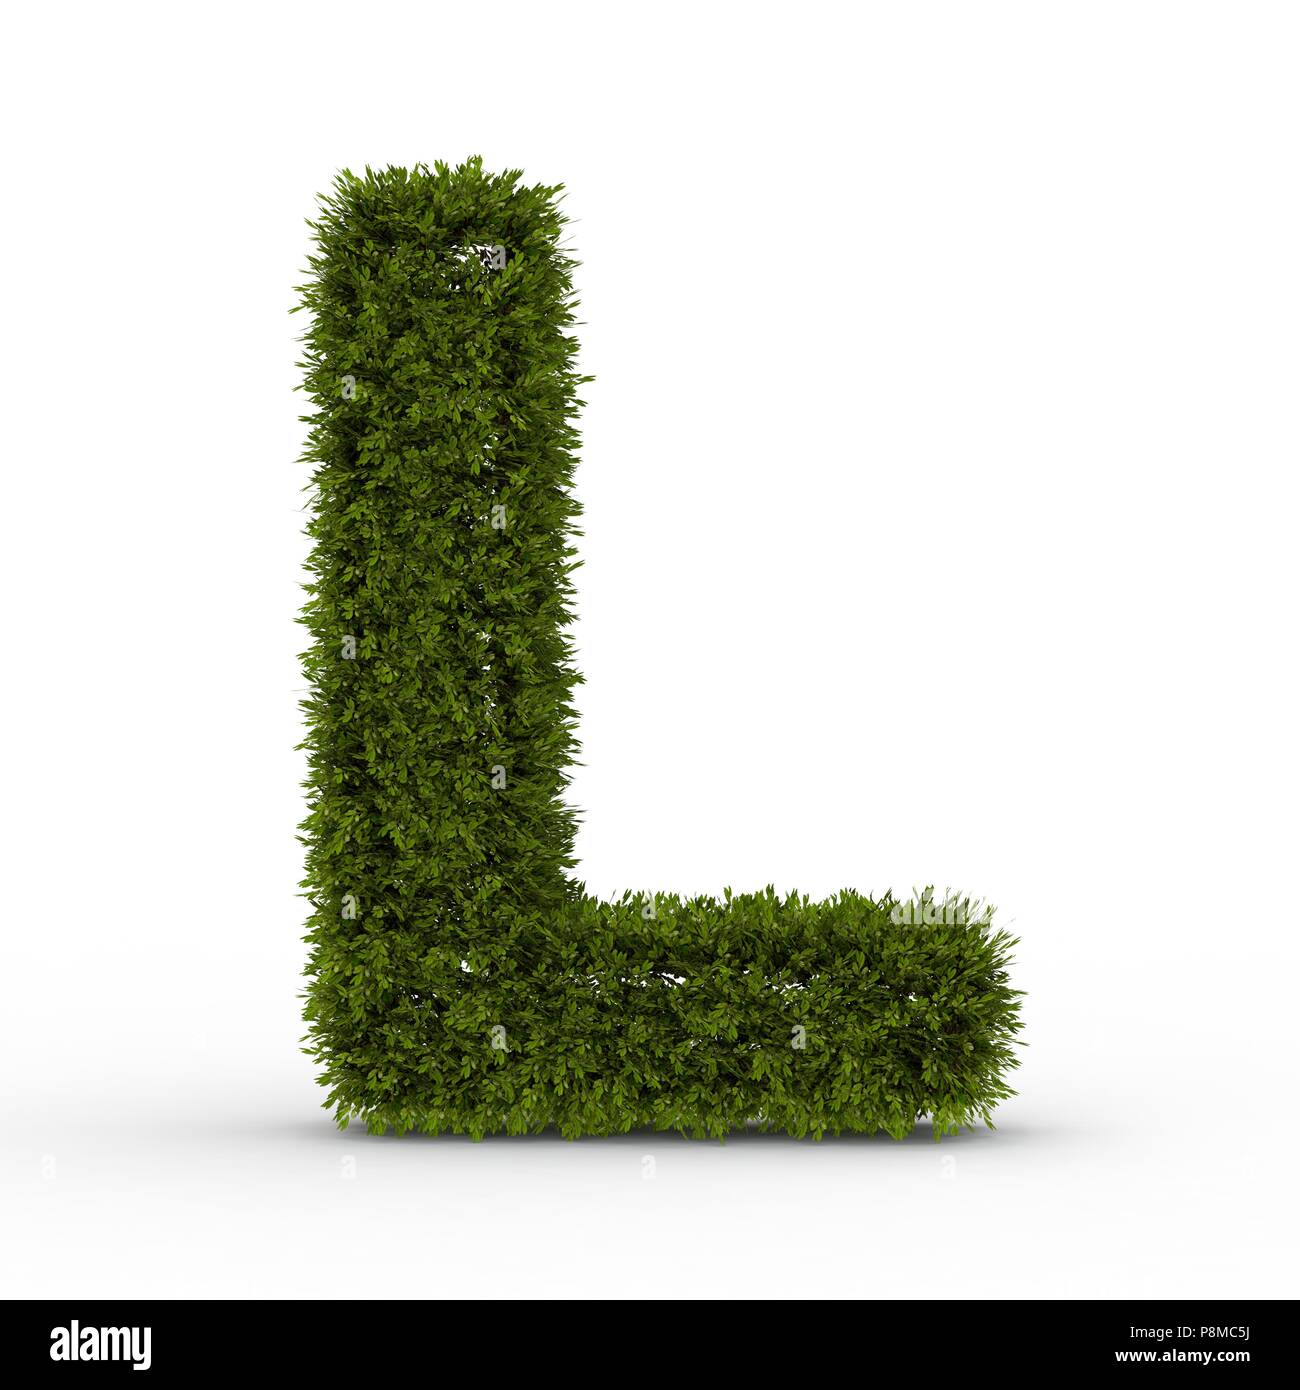 Gras letter L isolated on white background Stock Photo - Alamy